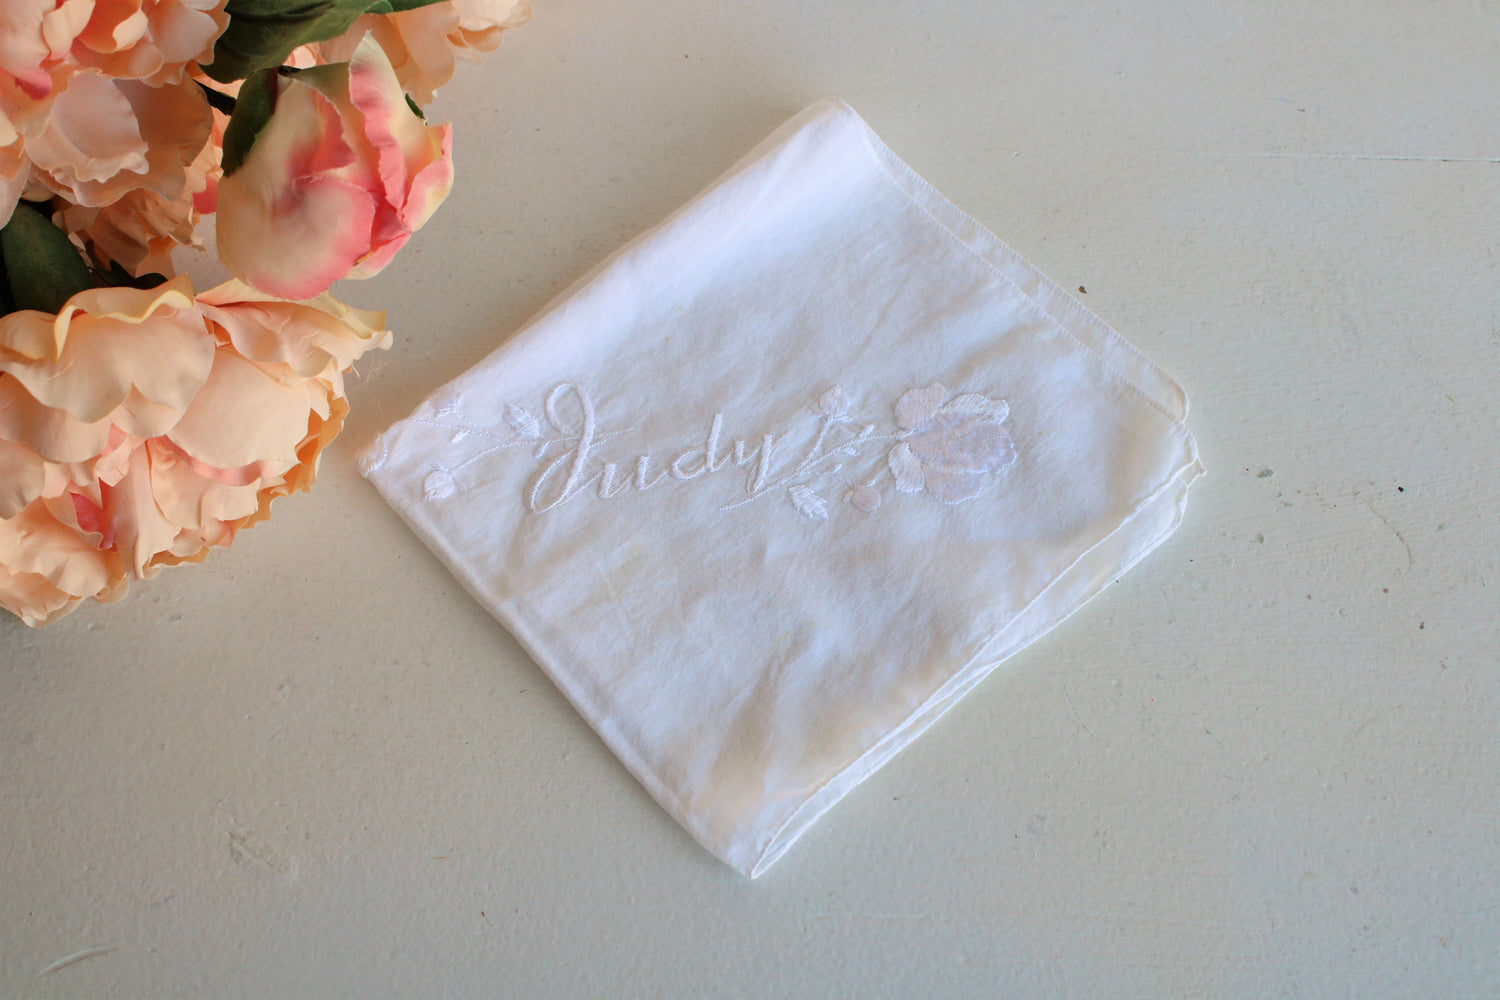 Vintage Embroidered Hanky, Monogrammed with Judy